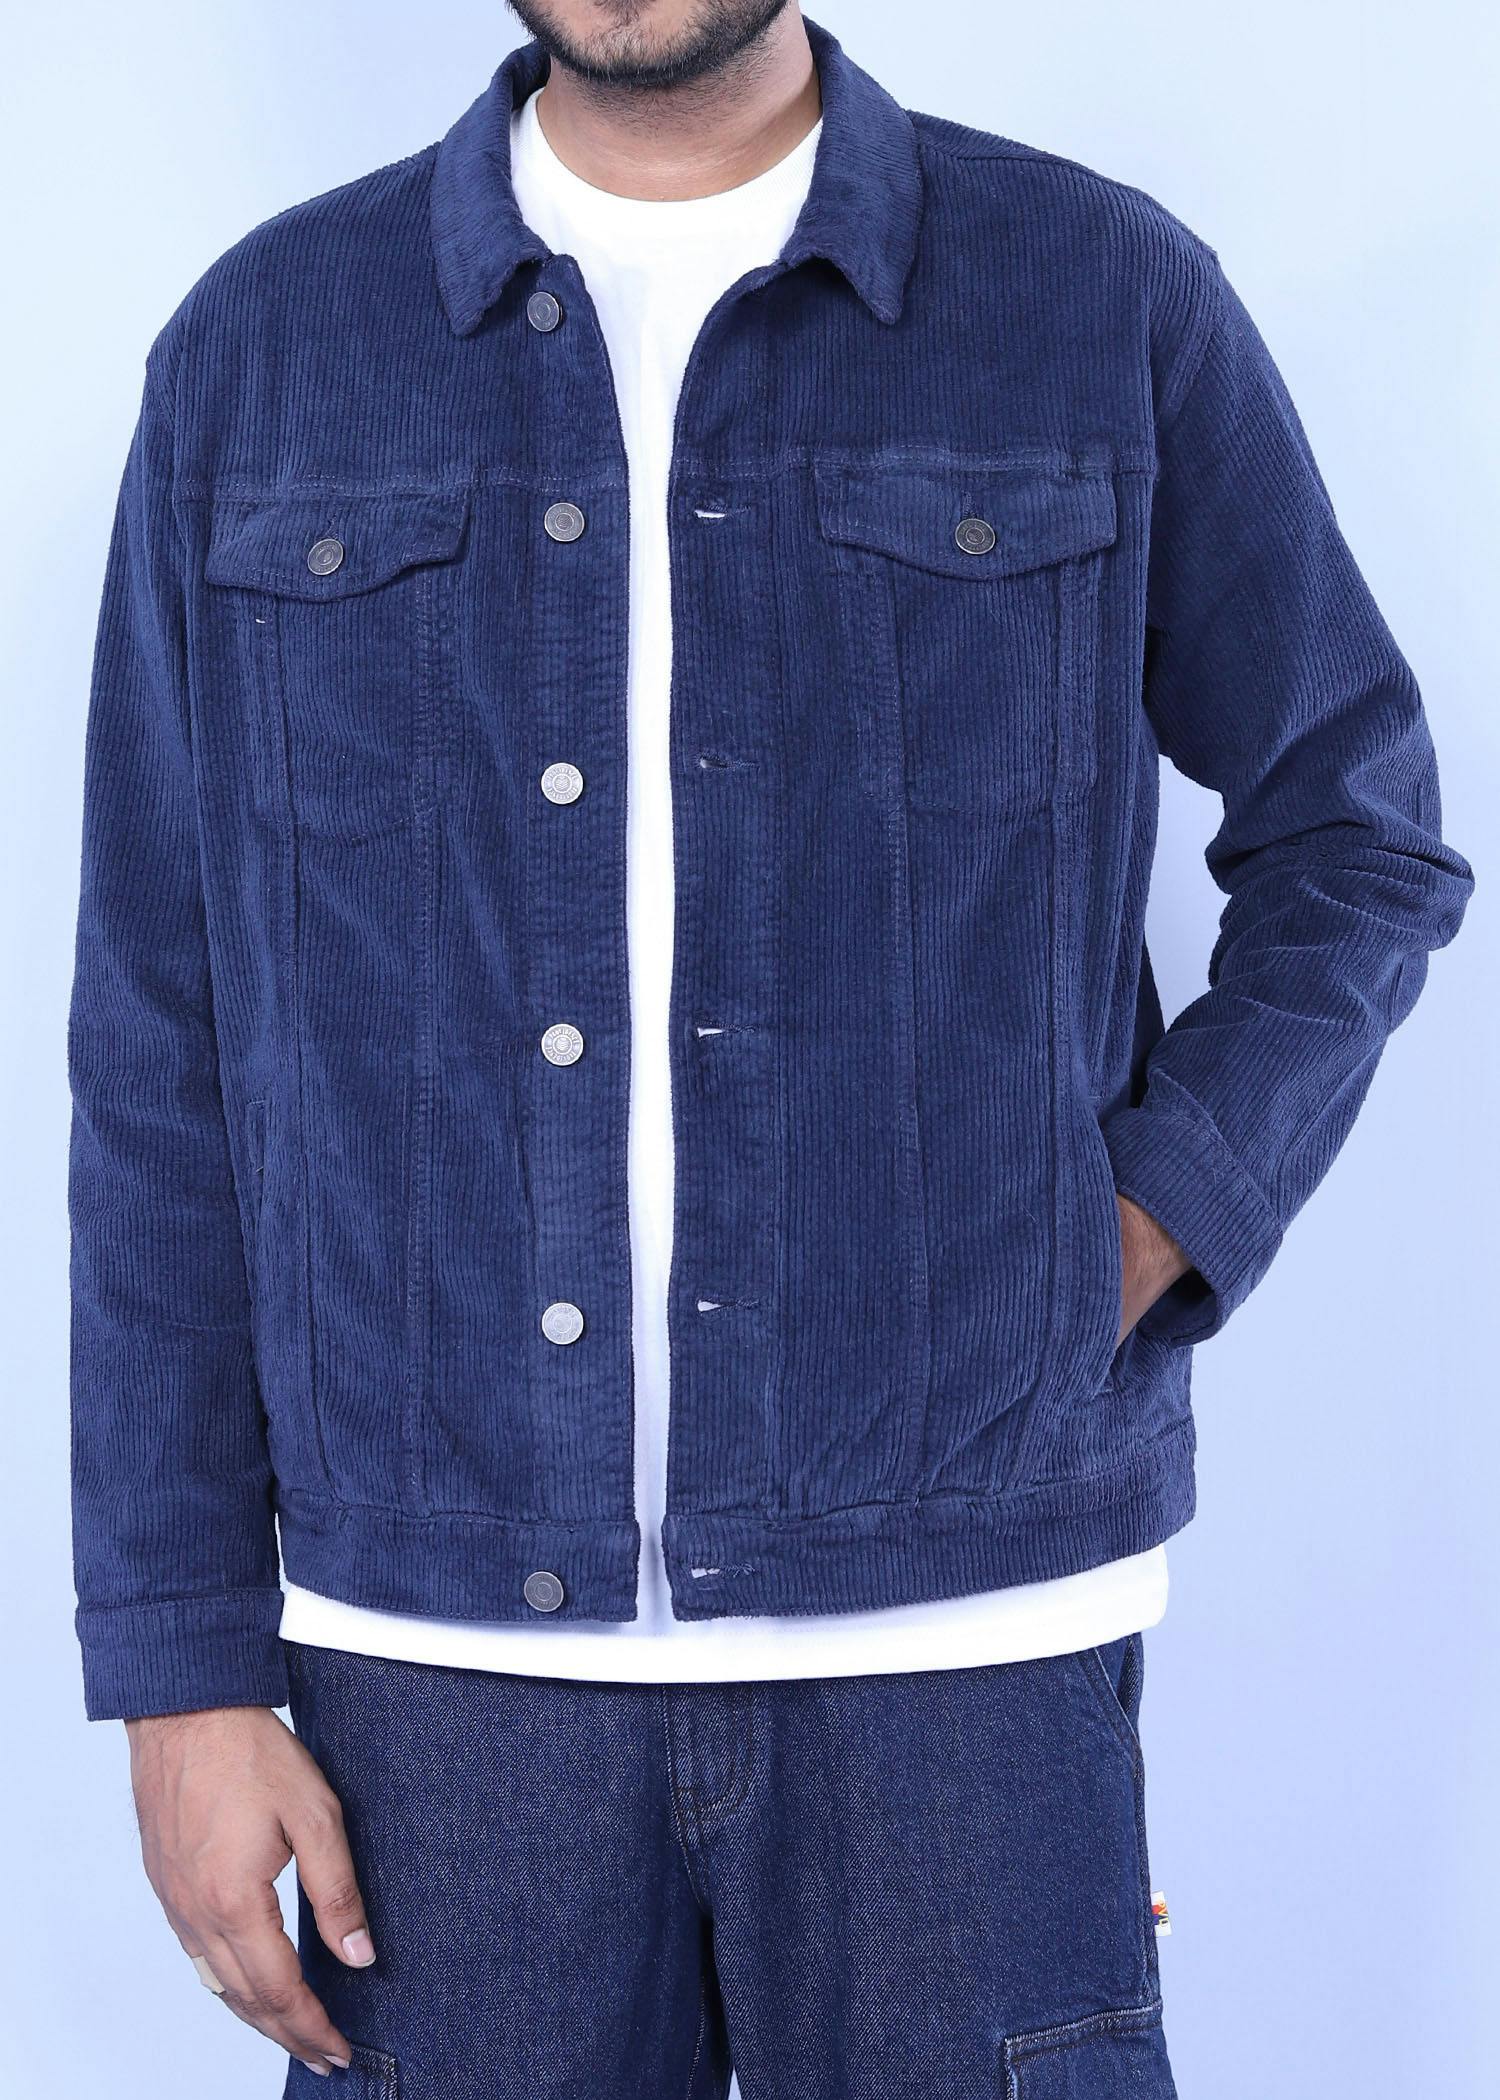 snipe cord jacket navy color half front view